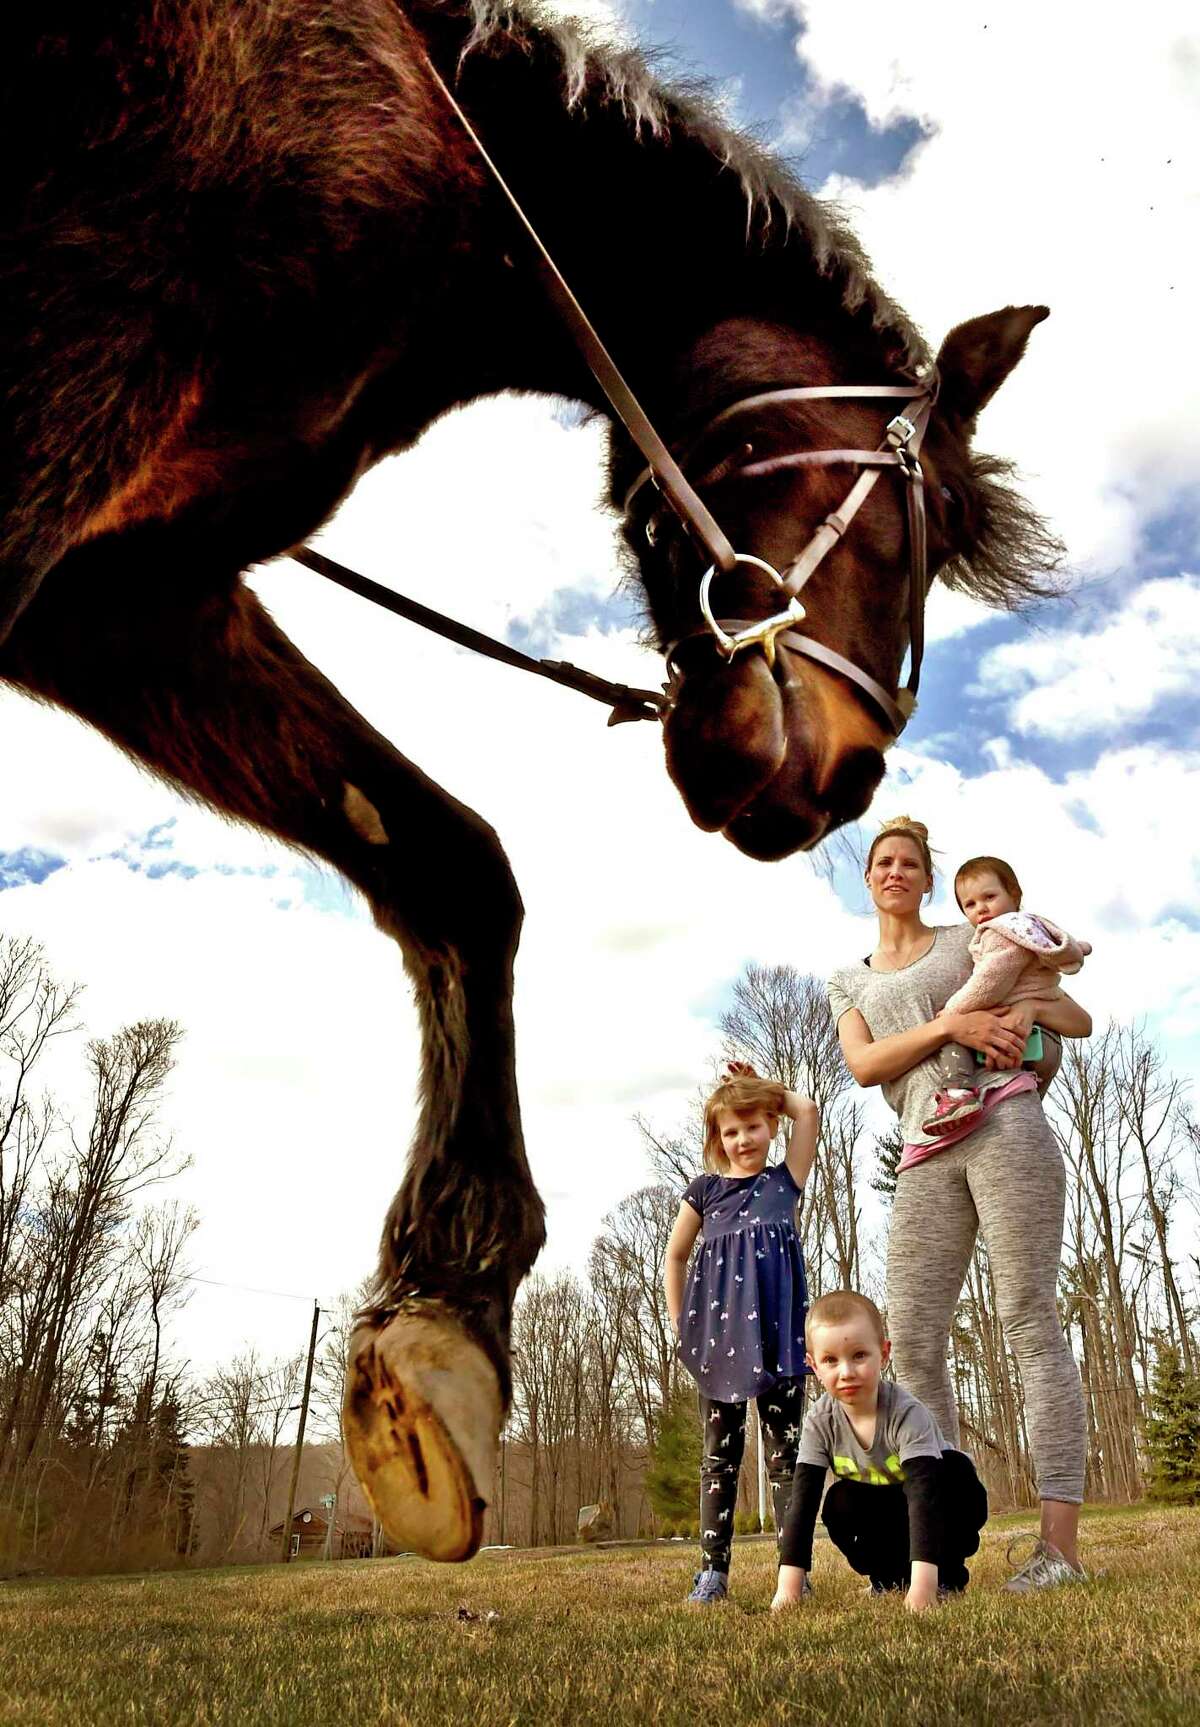 Cory Sells of Woodbridge using her Paso Fino breed horse Torpedo, 19, show's of his unique gait to Alissa Hill of Bethany and her children Madison, 1, Bradford, 3, and Mackenzie, 5. Sells, using Torpedo as a therapy horse, ride saround the Bear Hill Road area in Bethany twice a week, using social distancing, visiting neighborhood children and their parents staying in their homes during the coronavirus pandemic.